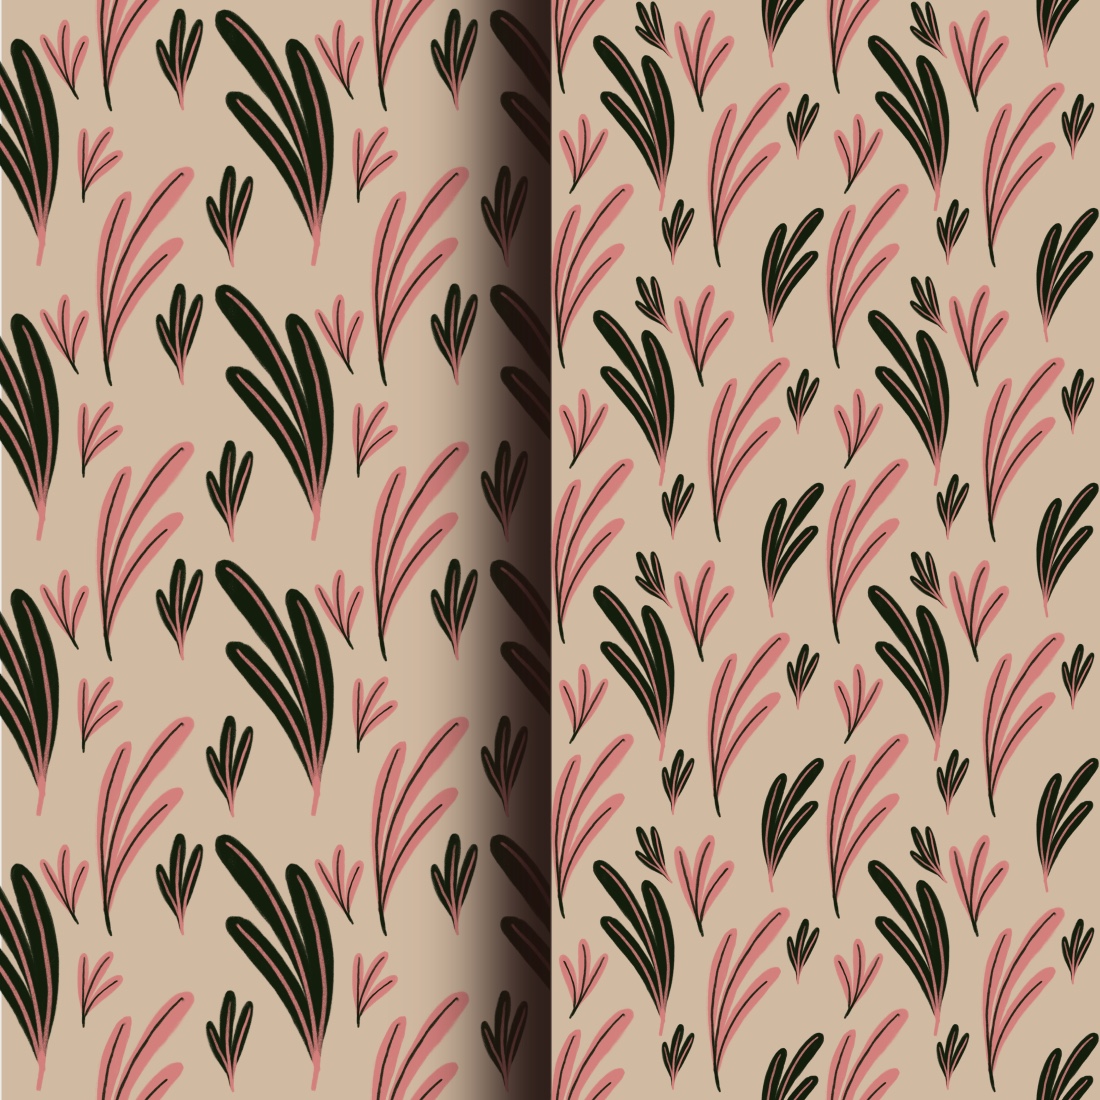 Leaves Pattern Design cover image.